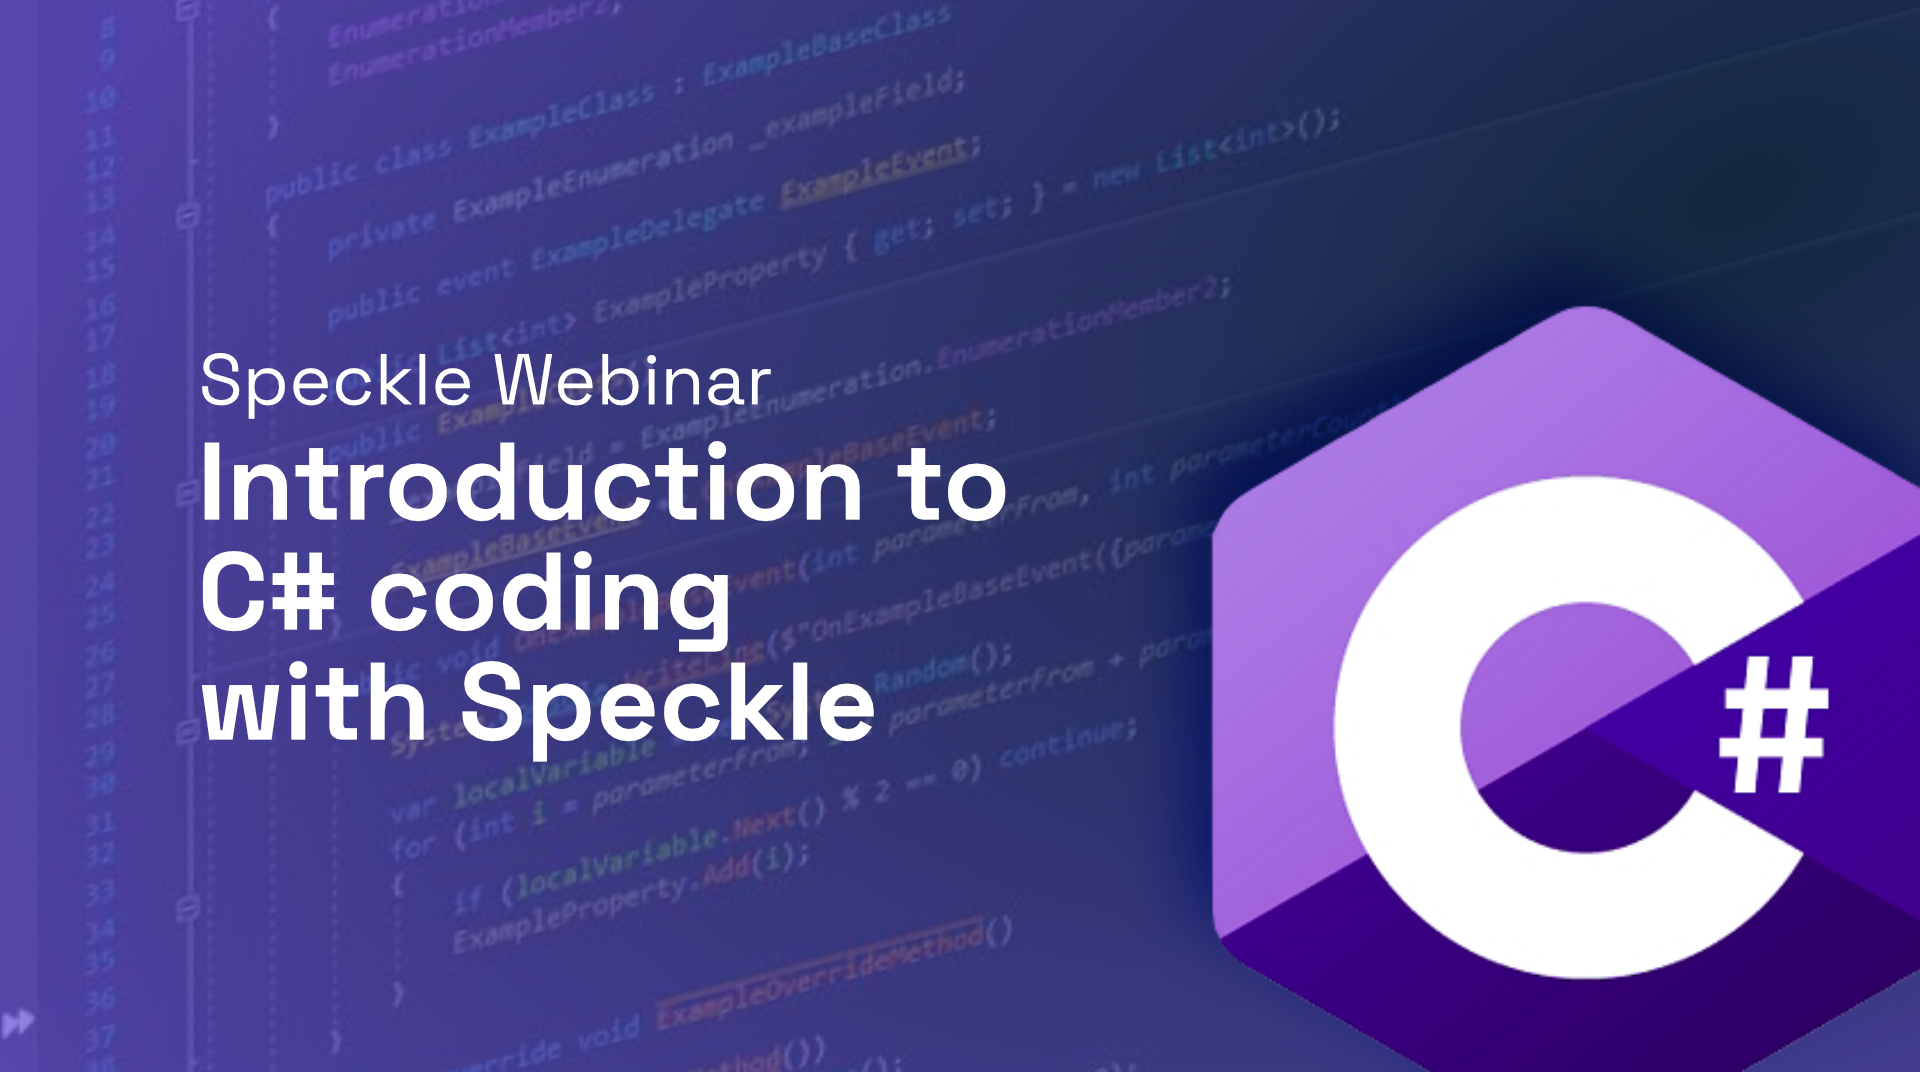 Intro to C# coding with Speckle